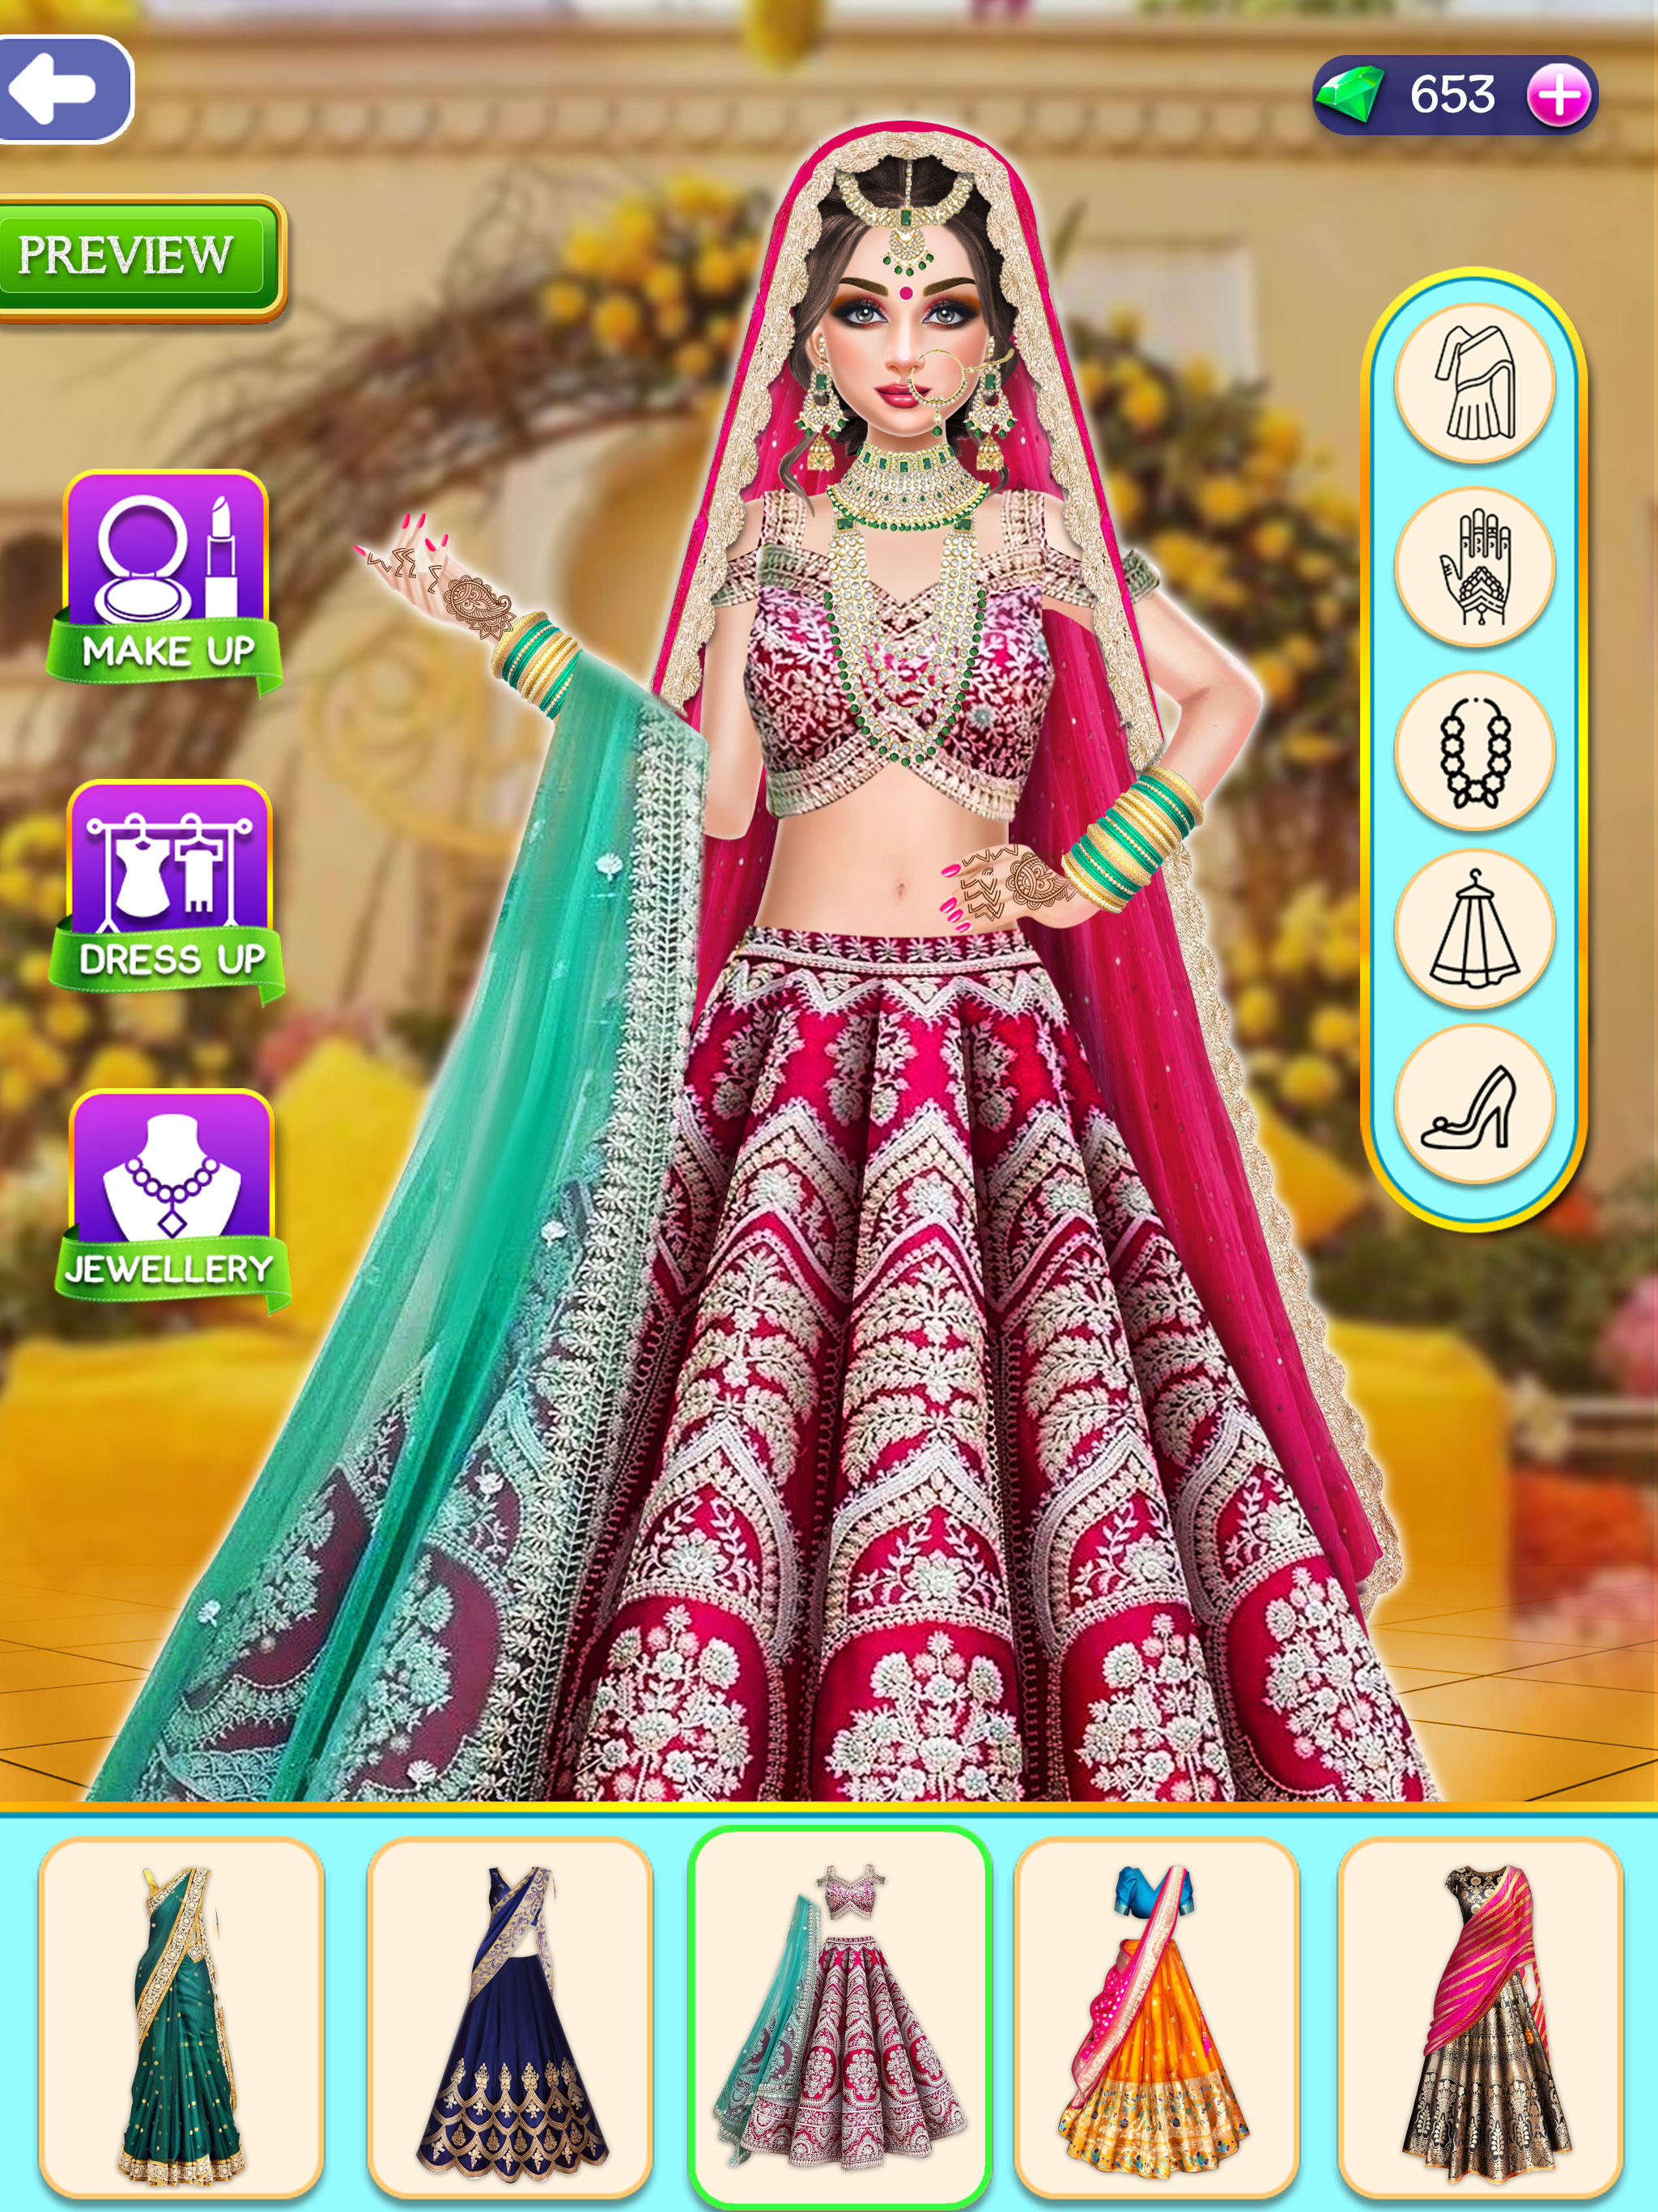 Indian Wedding Dress up & Makeover 2 Apk Download for Android- Latest  version 4.0- com.unitm.android.indianweddingmakeoverrs